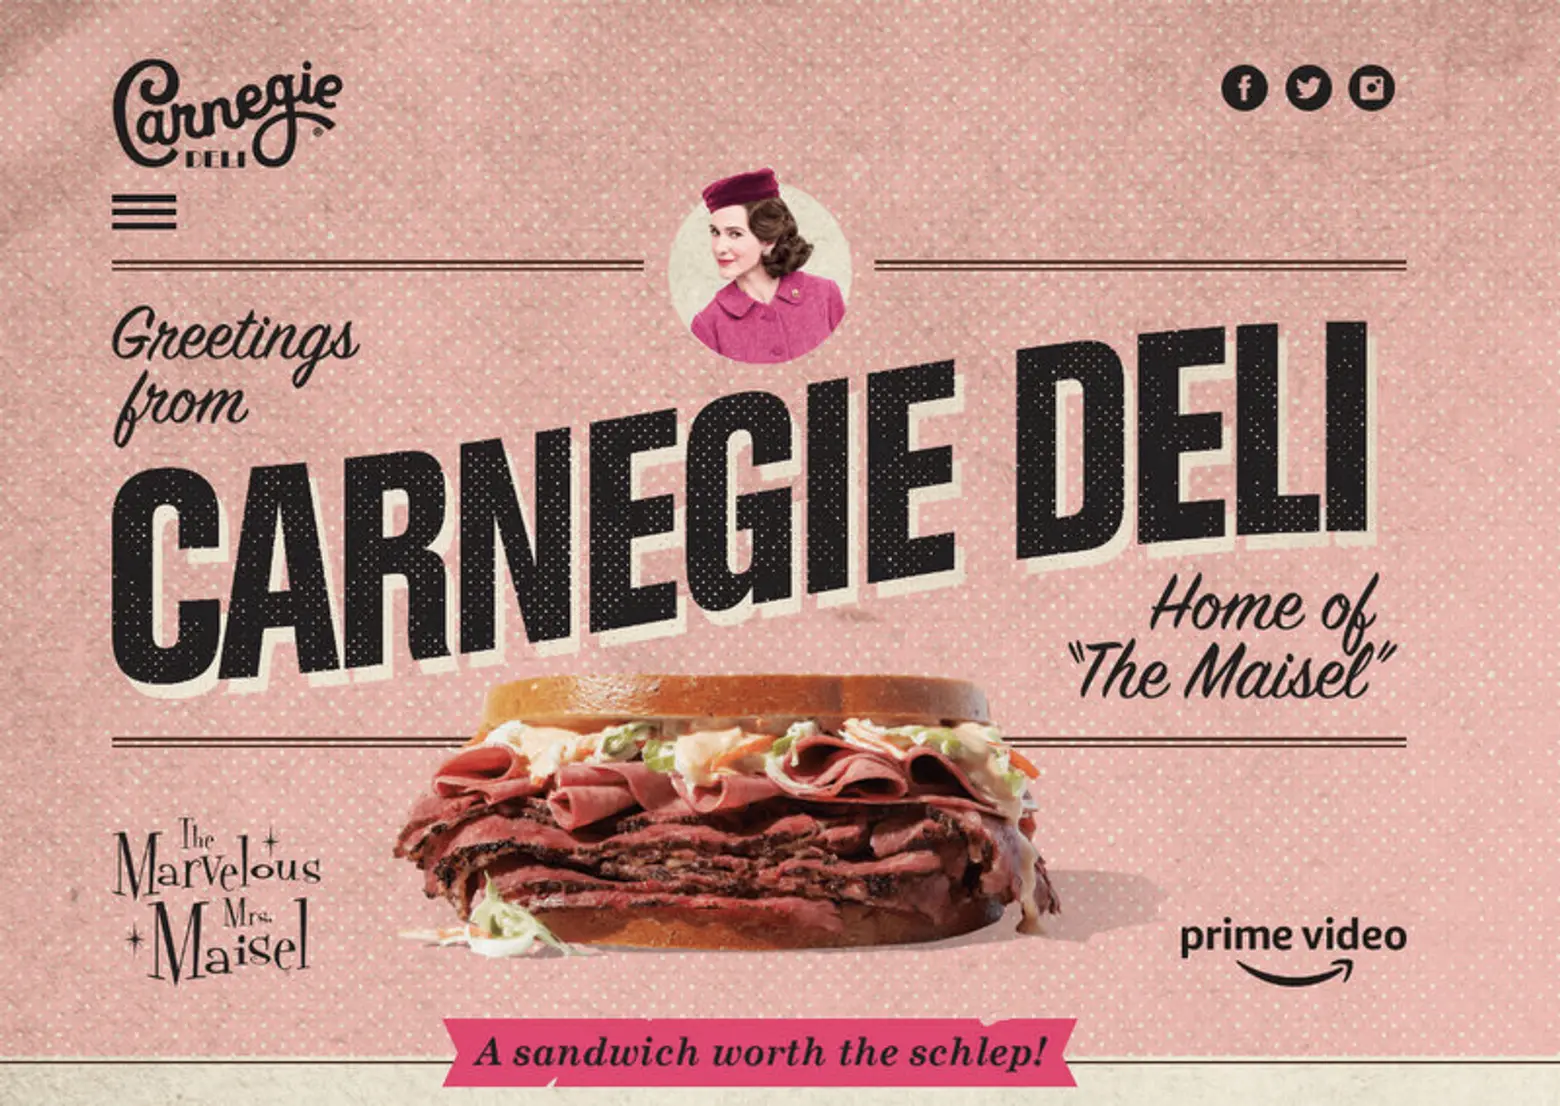 Carnegie Deli returns as a pop-up for one week in Nolita, serving up 99-cent sandwiches